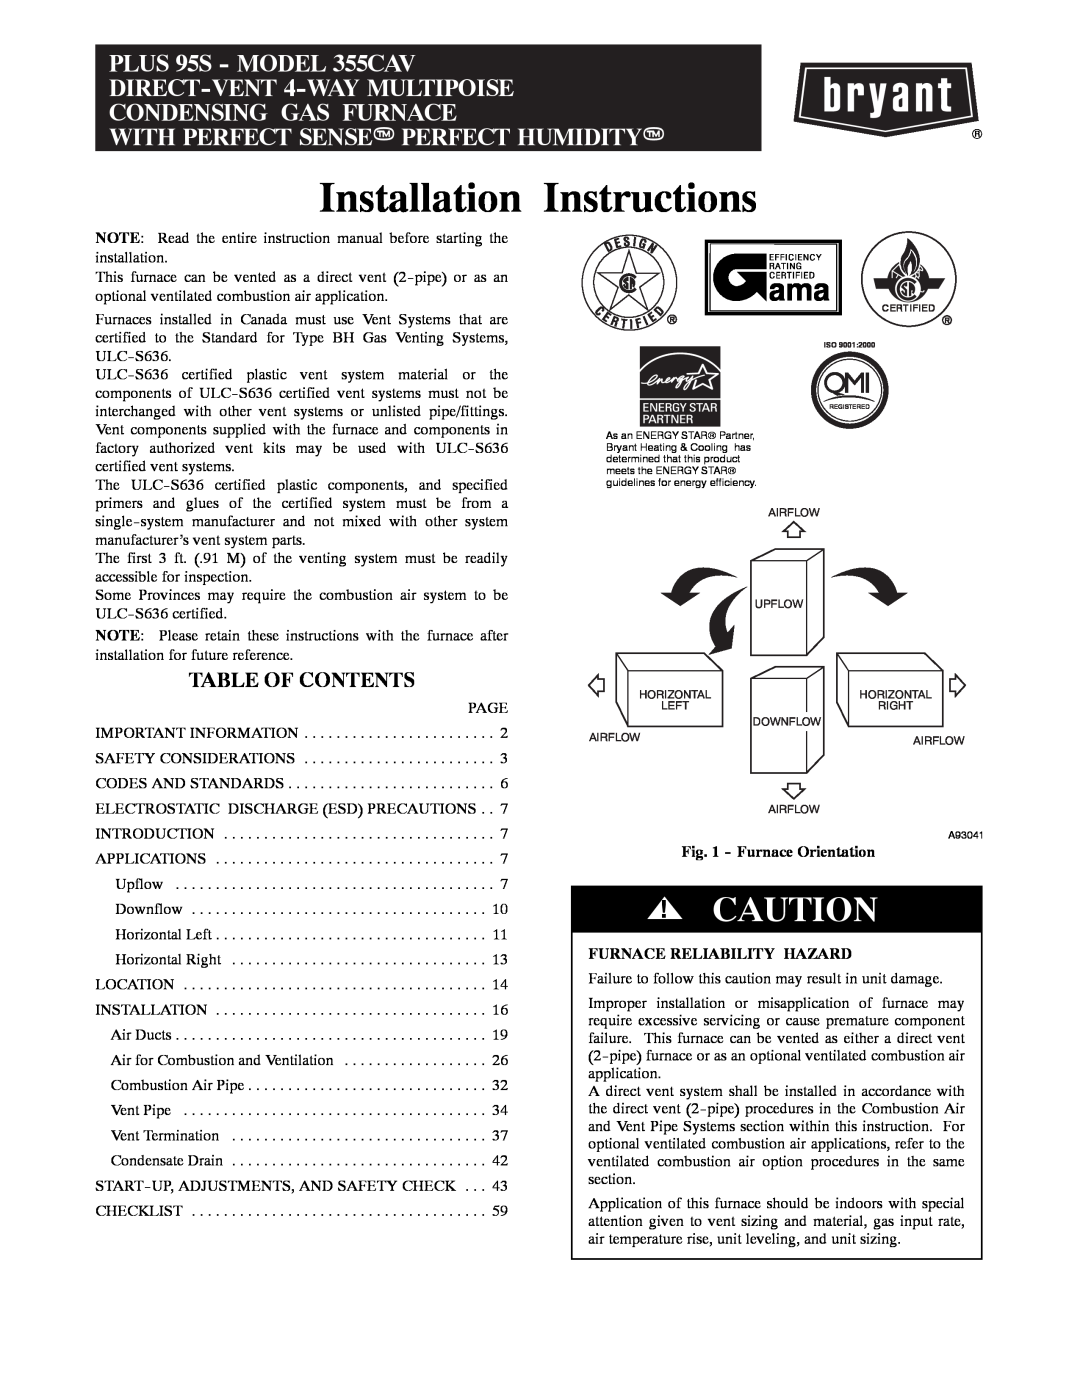 Bryant owner manual PLUS 95S - MODEL 355CAV, Note To Installer, Fire Or Explosion Hazard 